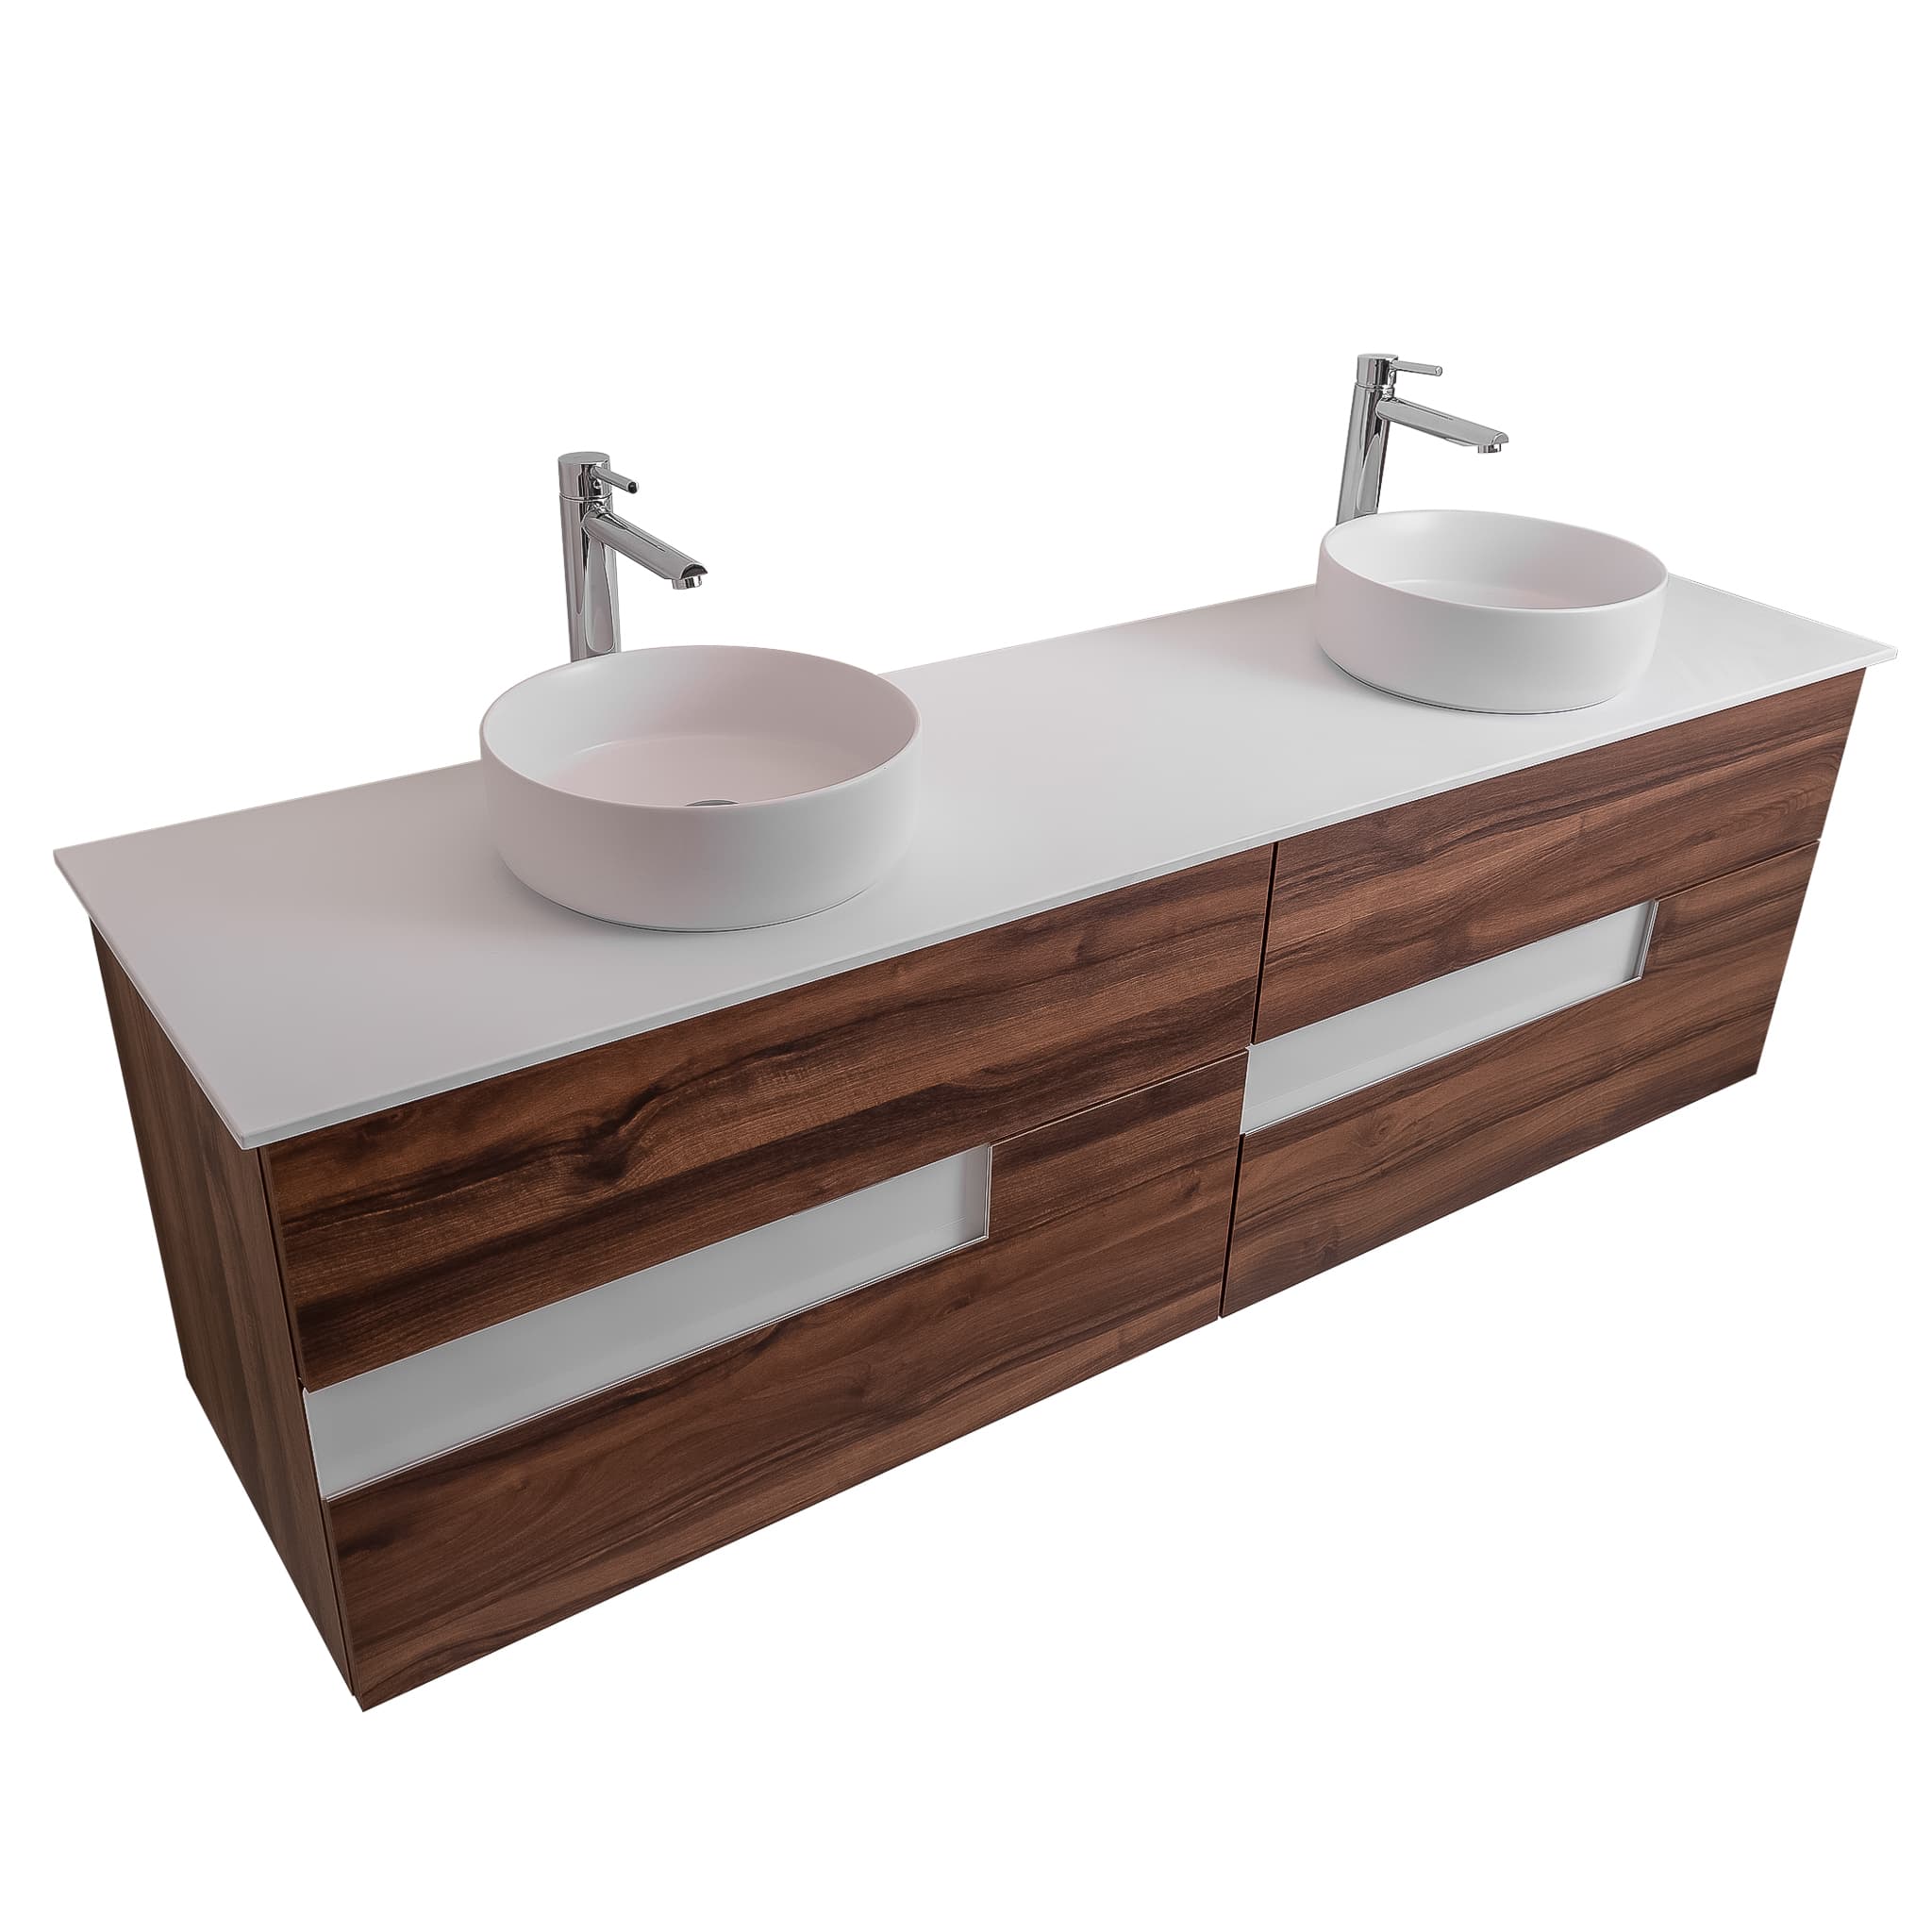 Vision 72 Valenti Medium Brown Wood Cabinet, Ares White Top And Two Ares White Ceramic Basin, Wall Mounted Modern Vanity Set